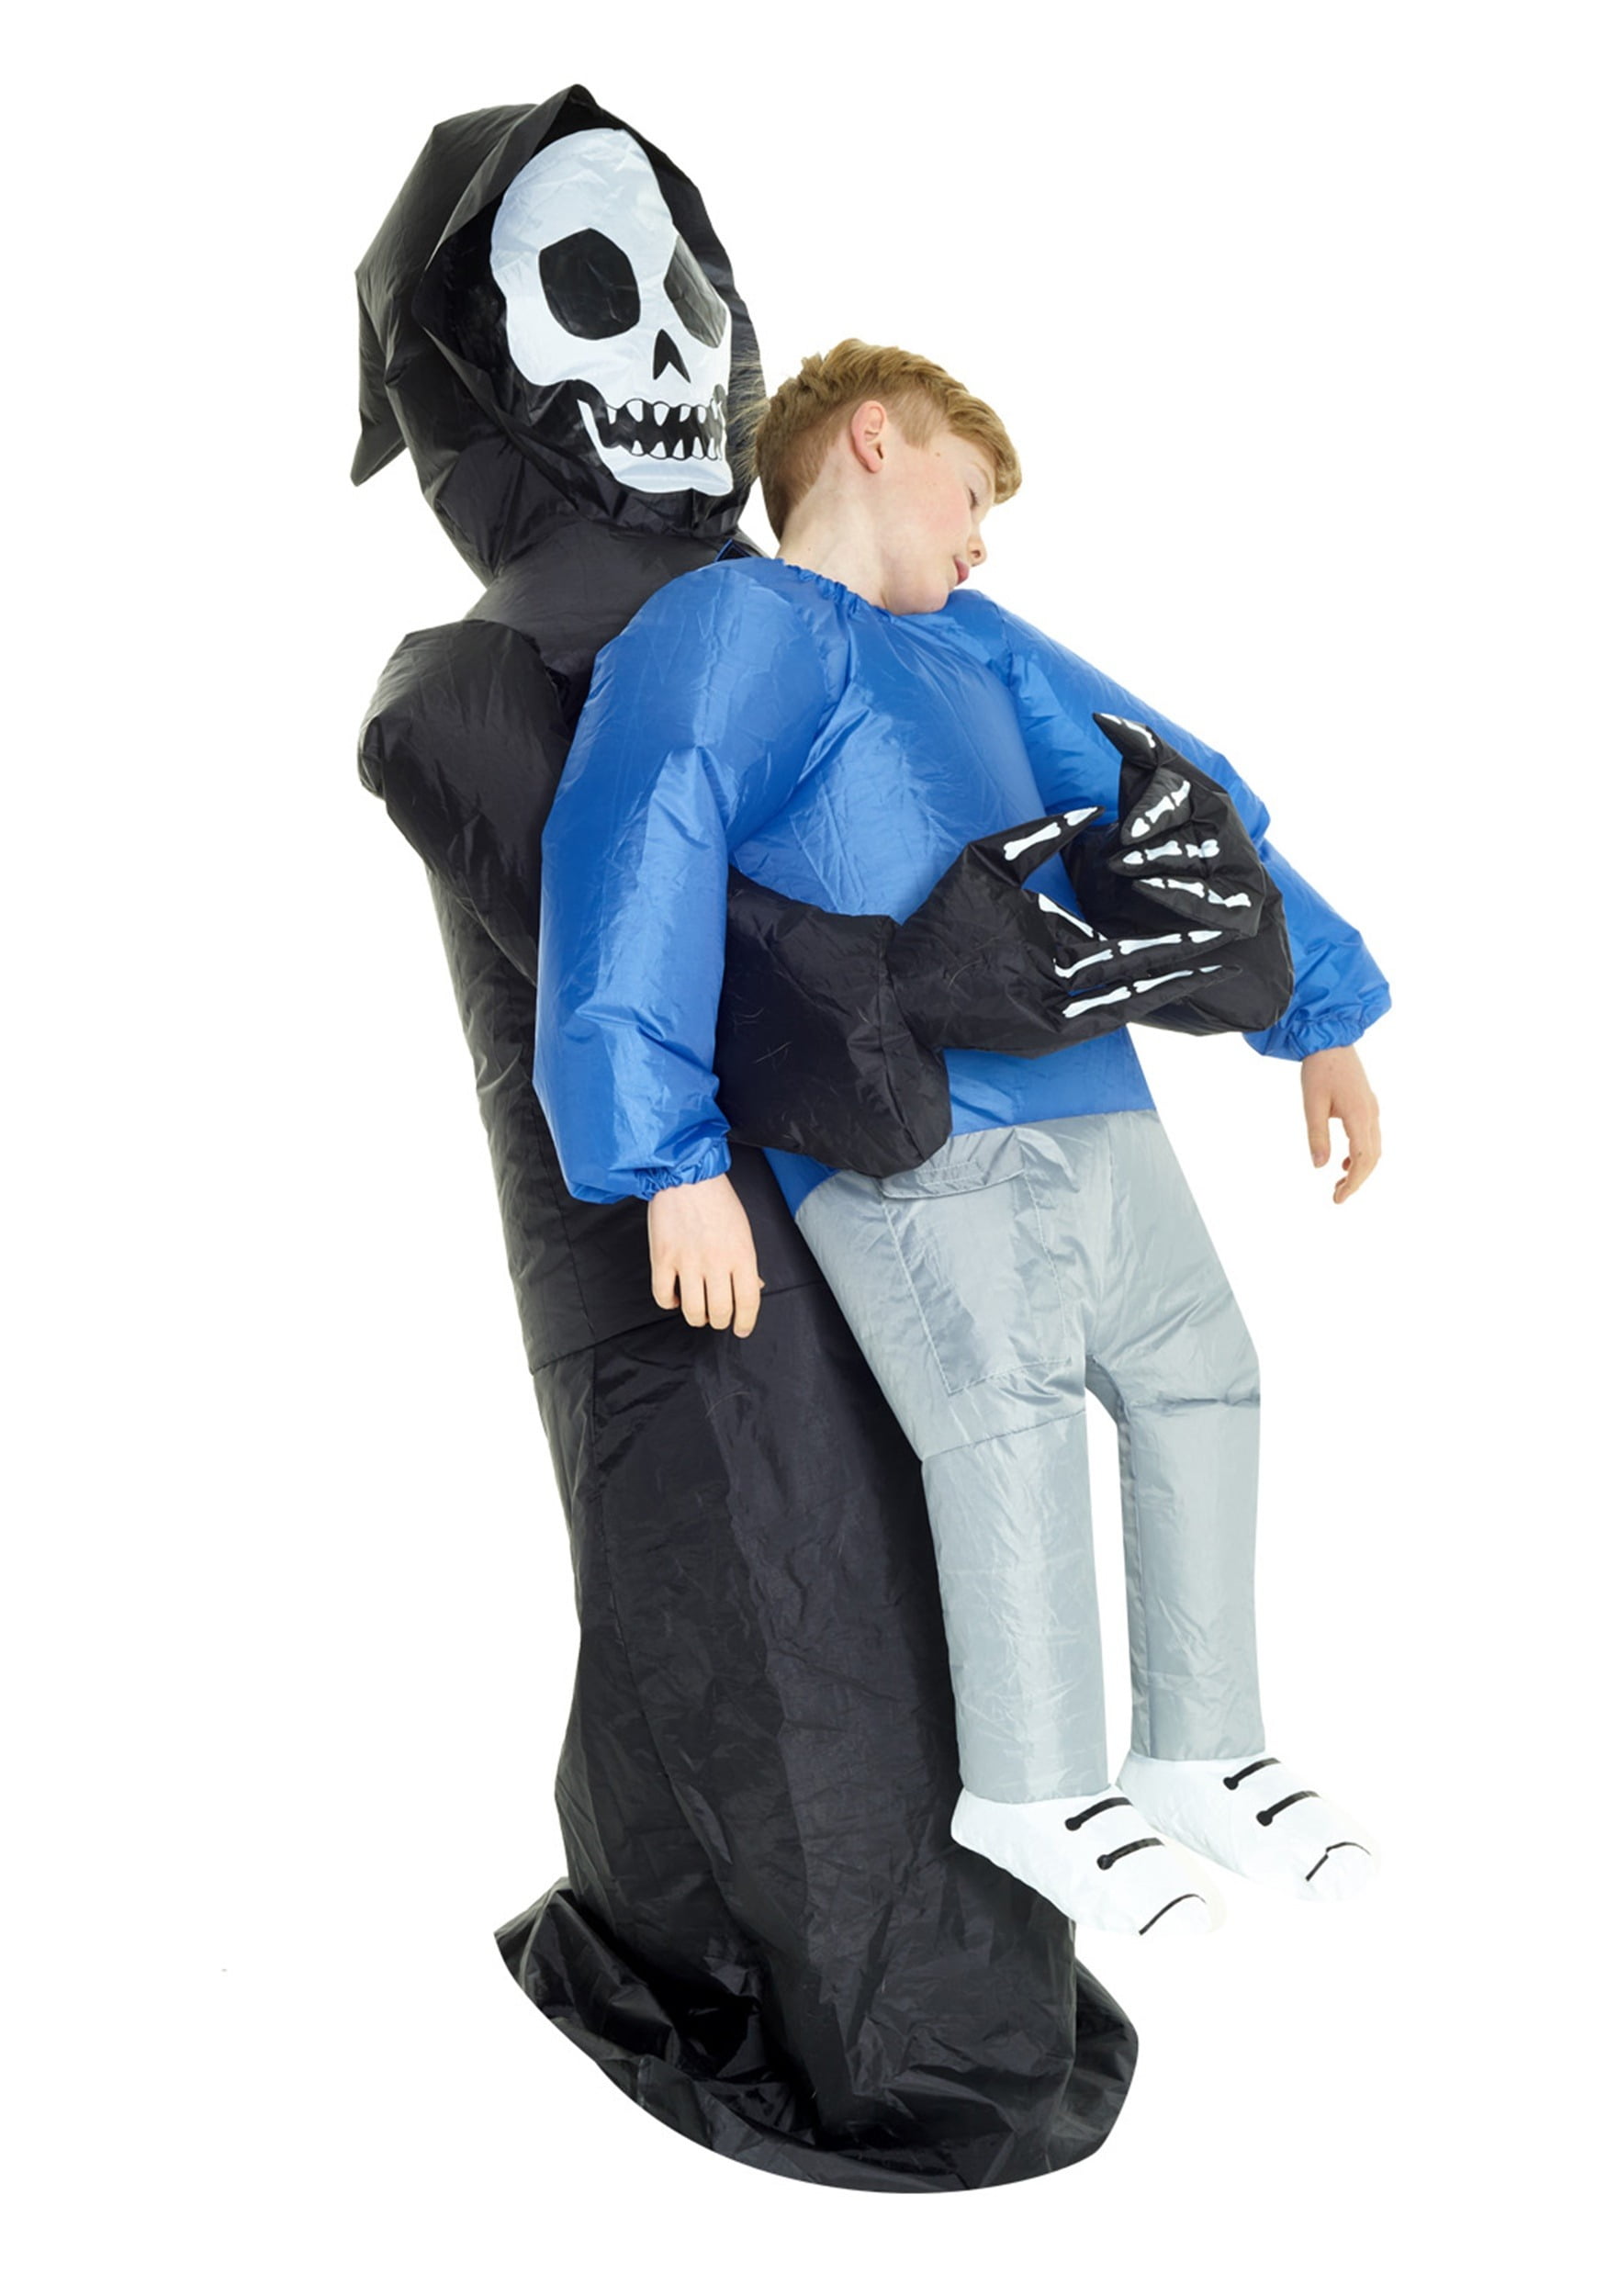 Kids Child Childrens Scary Inflatable Grim Reaper Fancy Dress Costume Halloween 